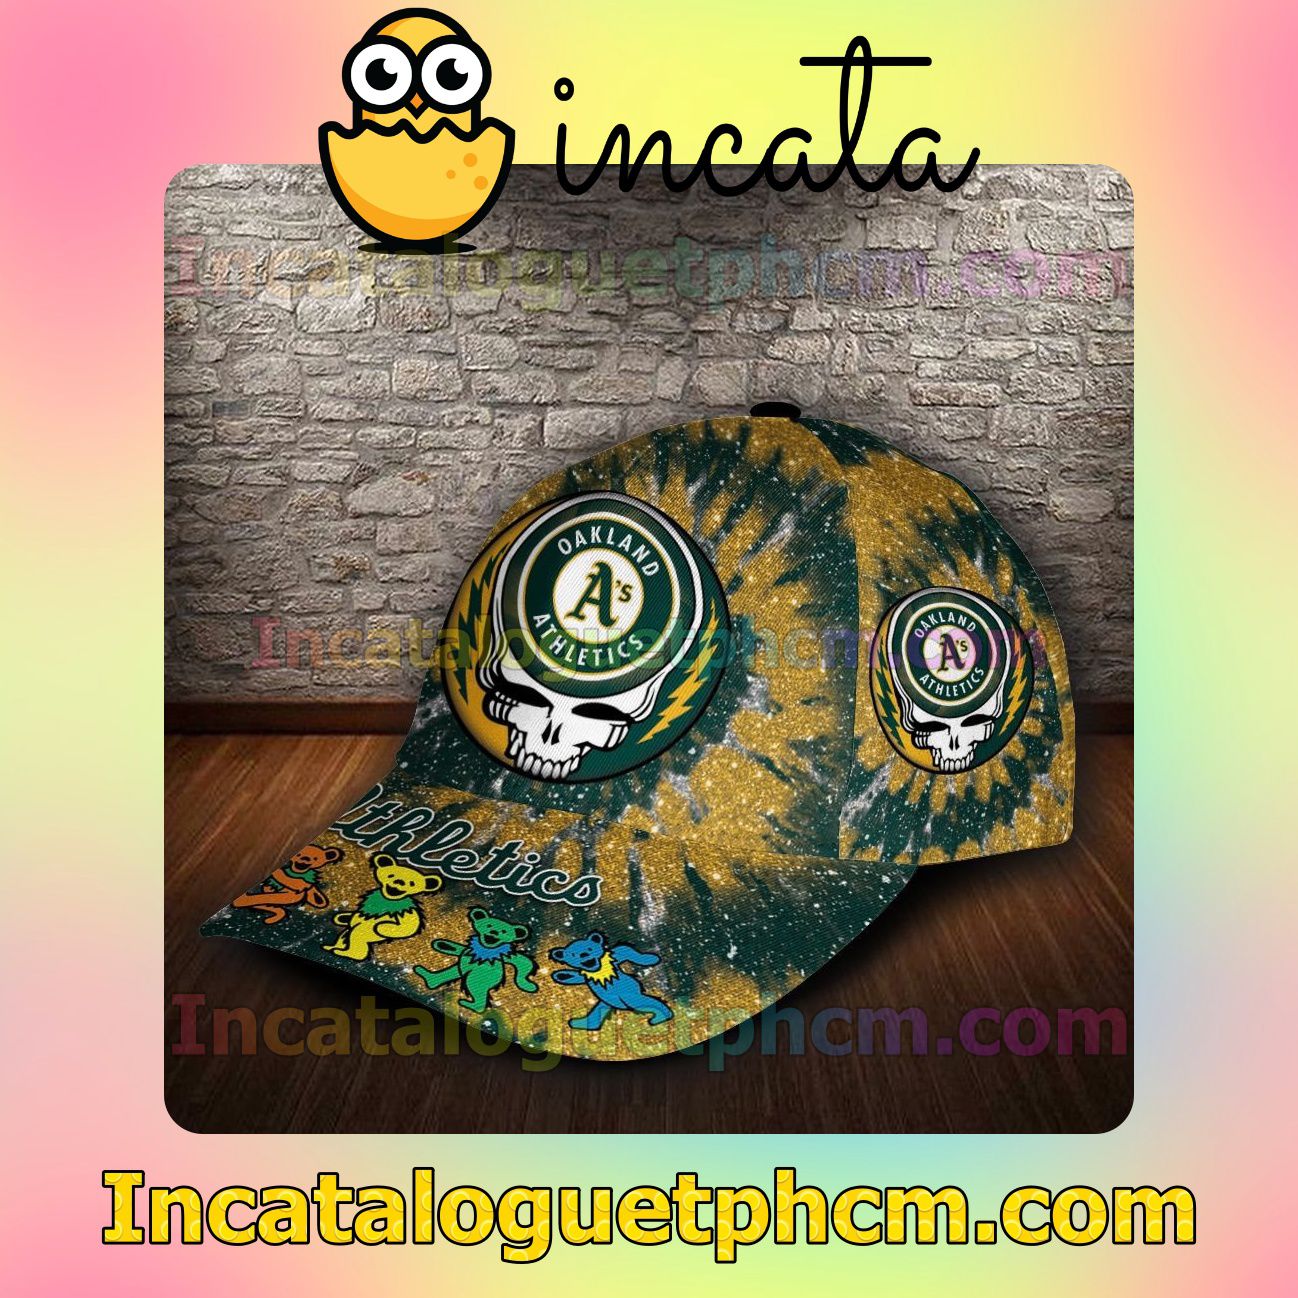 Real Oakland Athletics & Grateful Dead Band MLB Customized Hat Caps